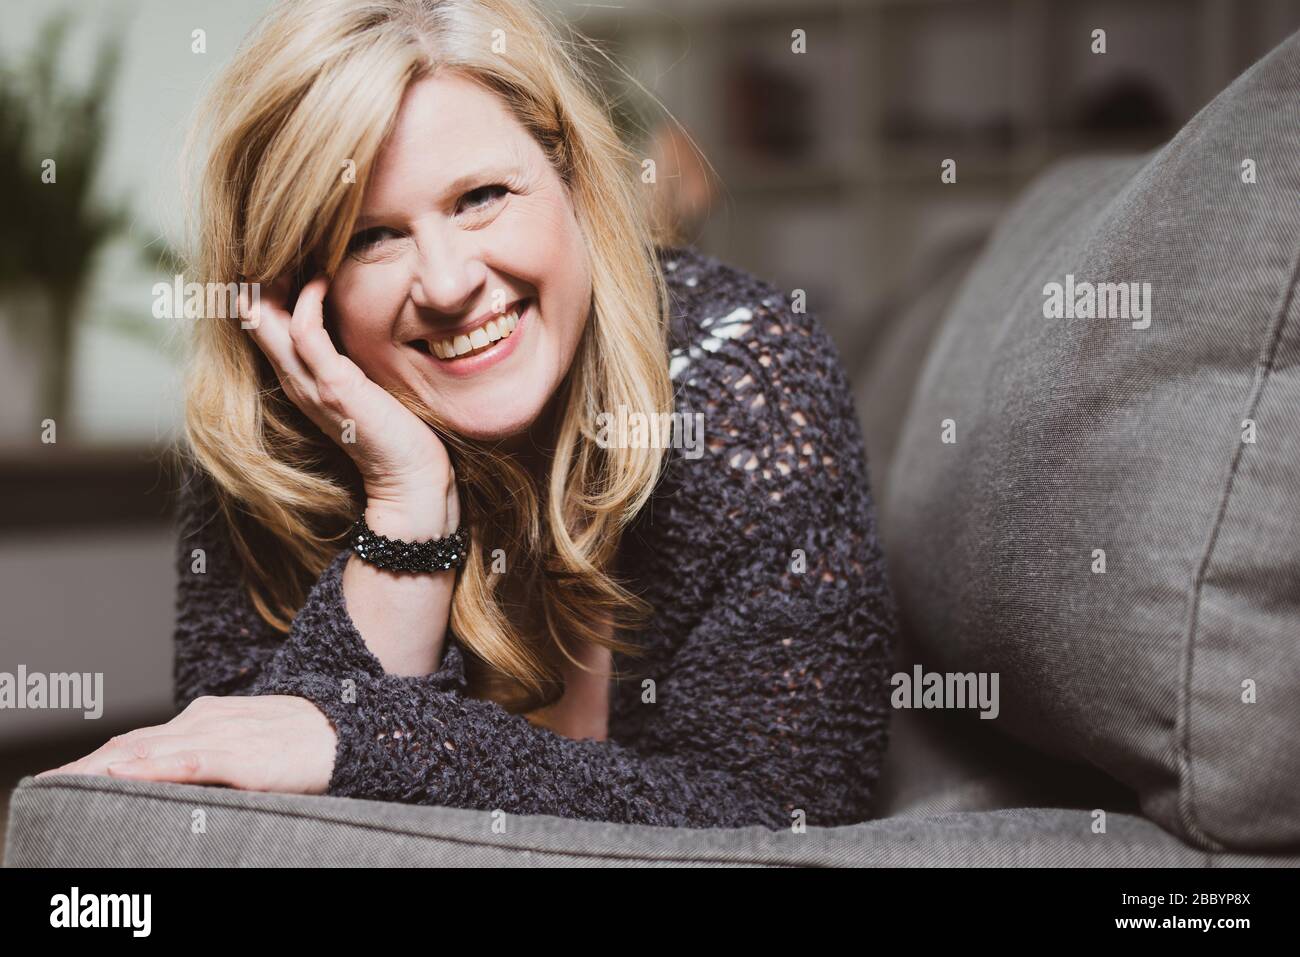 Portrait of an attractive middle-aged woman Stock Photo